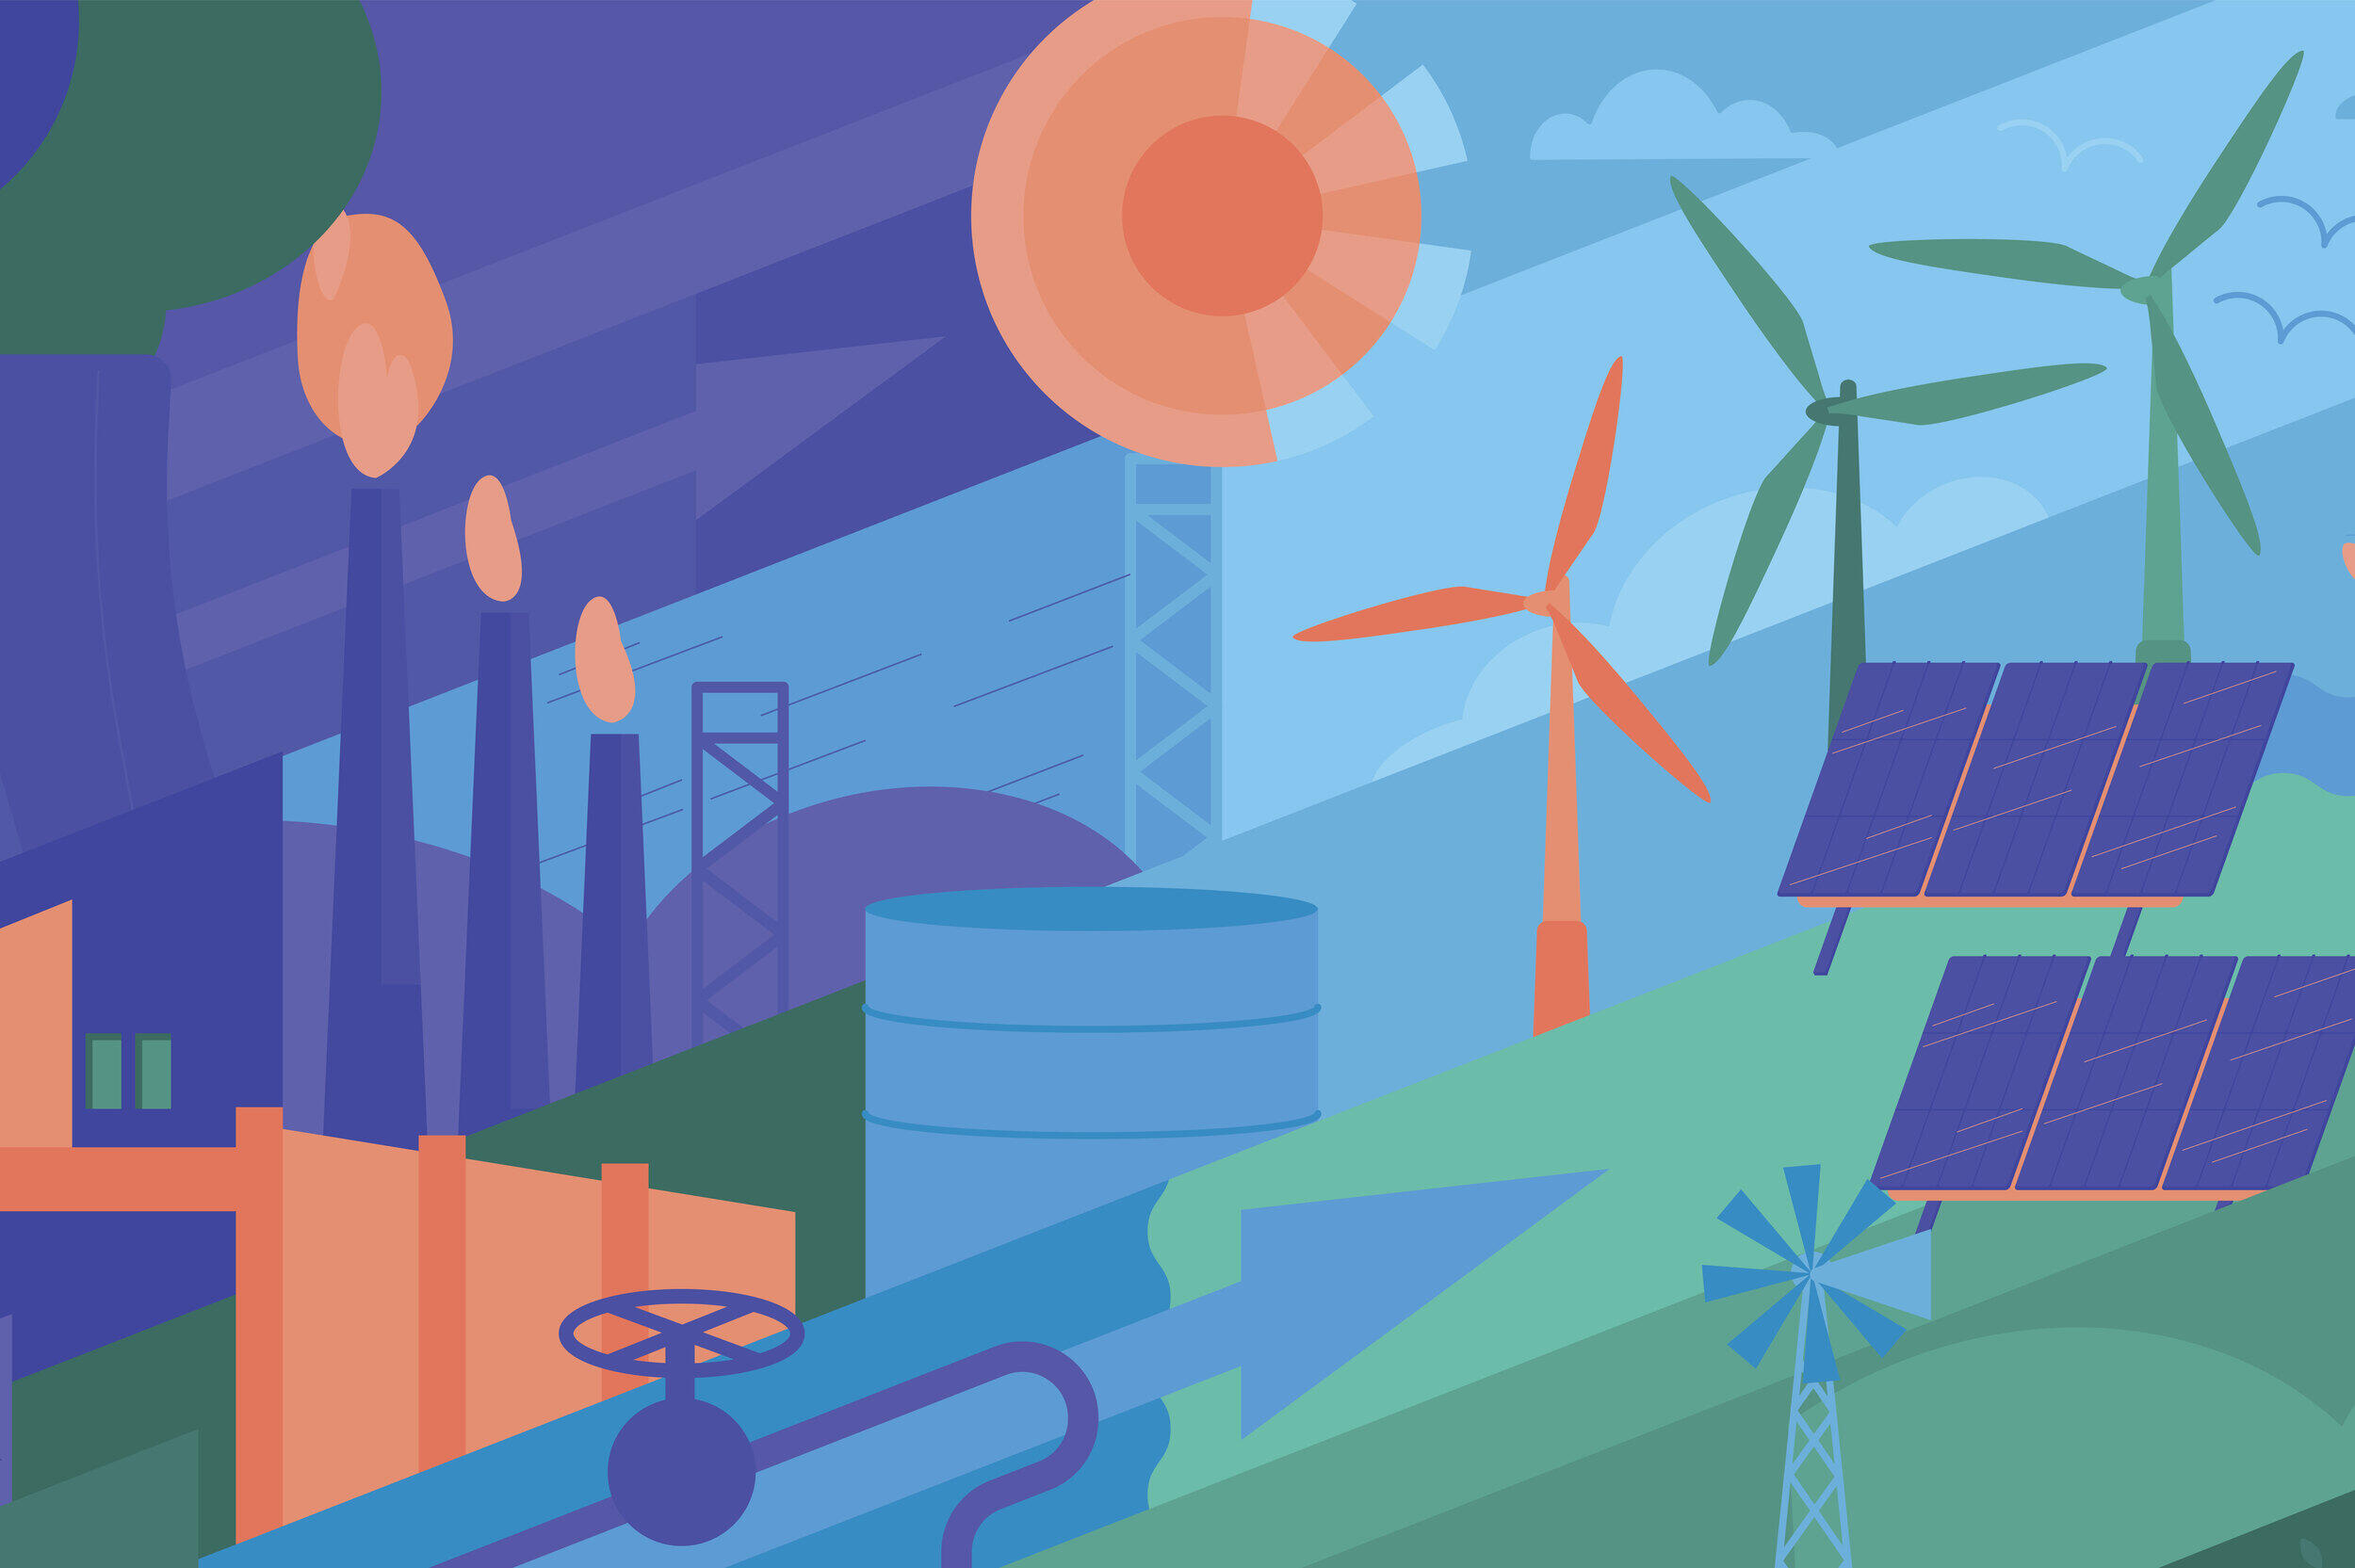 An illustration shows various power-related images, such as a gasline, windmill, solar panels and wind turbines.